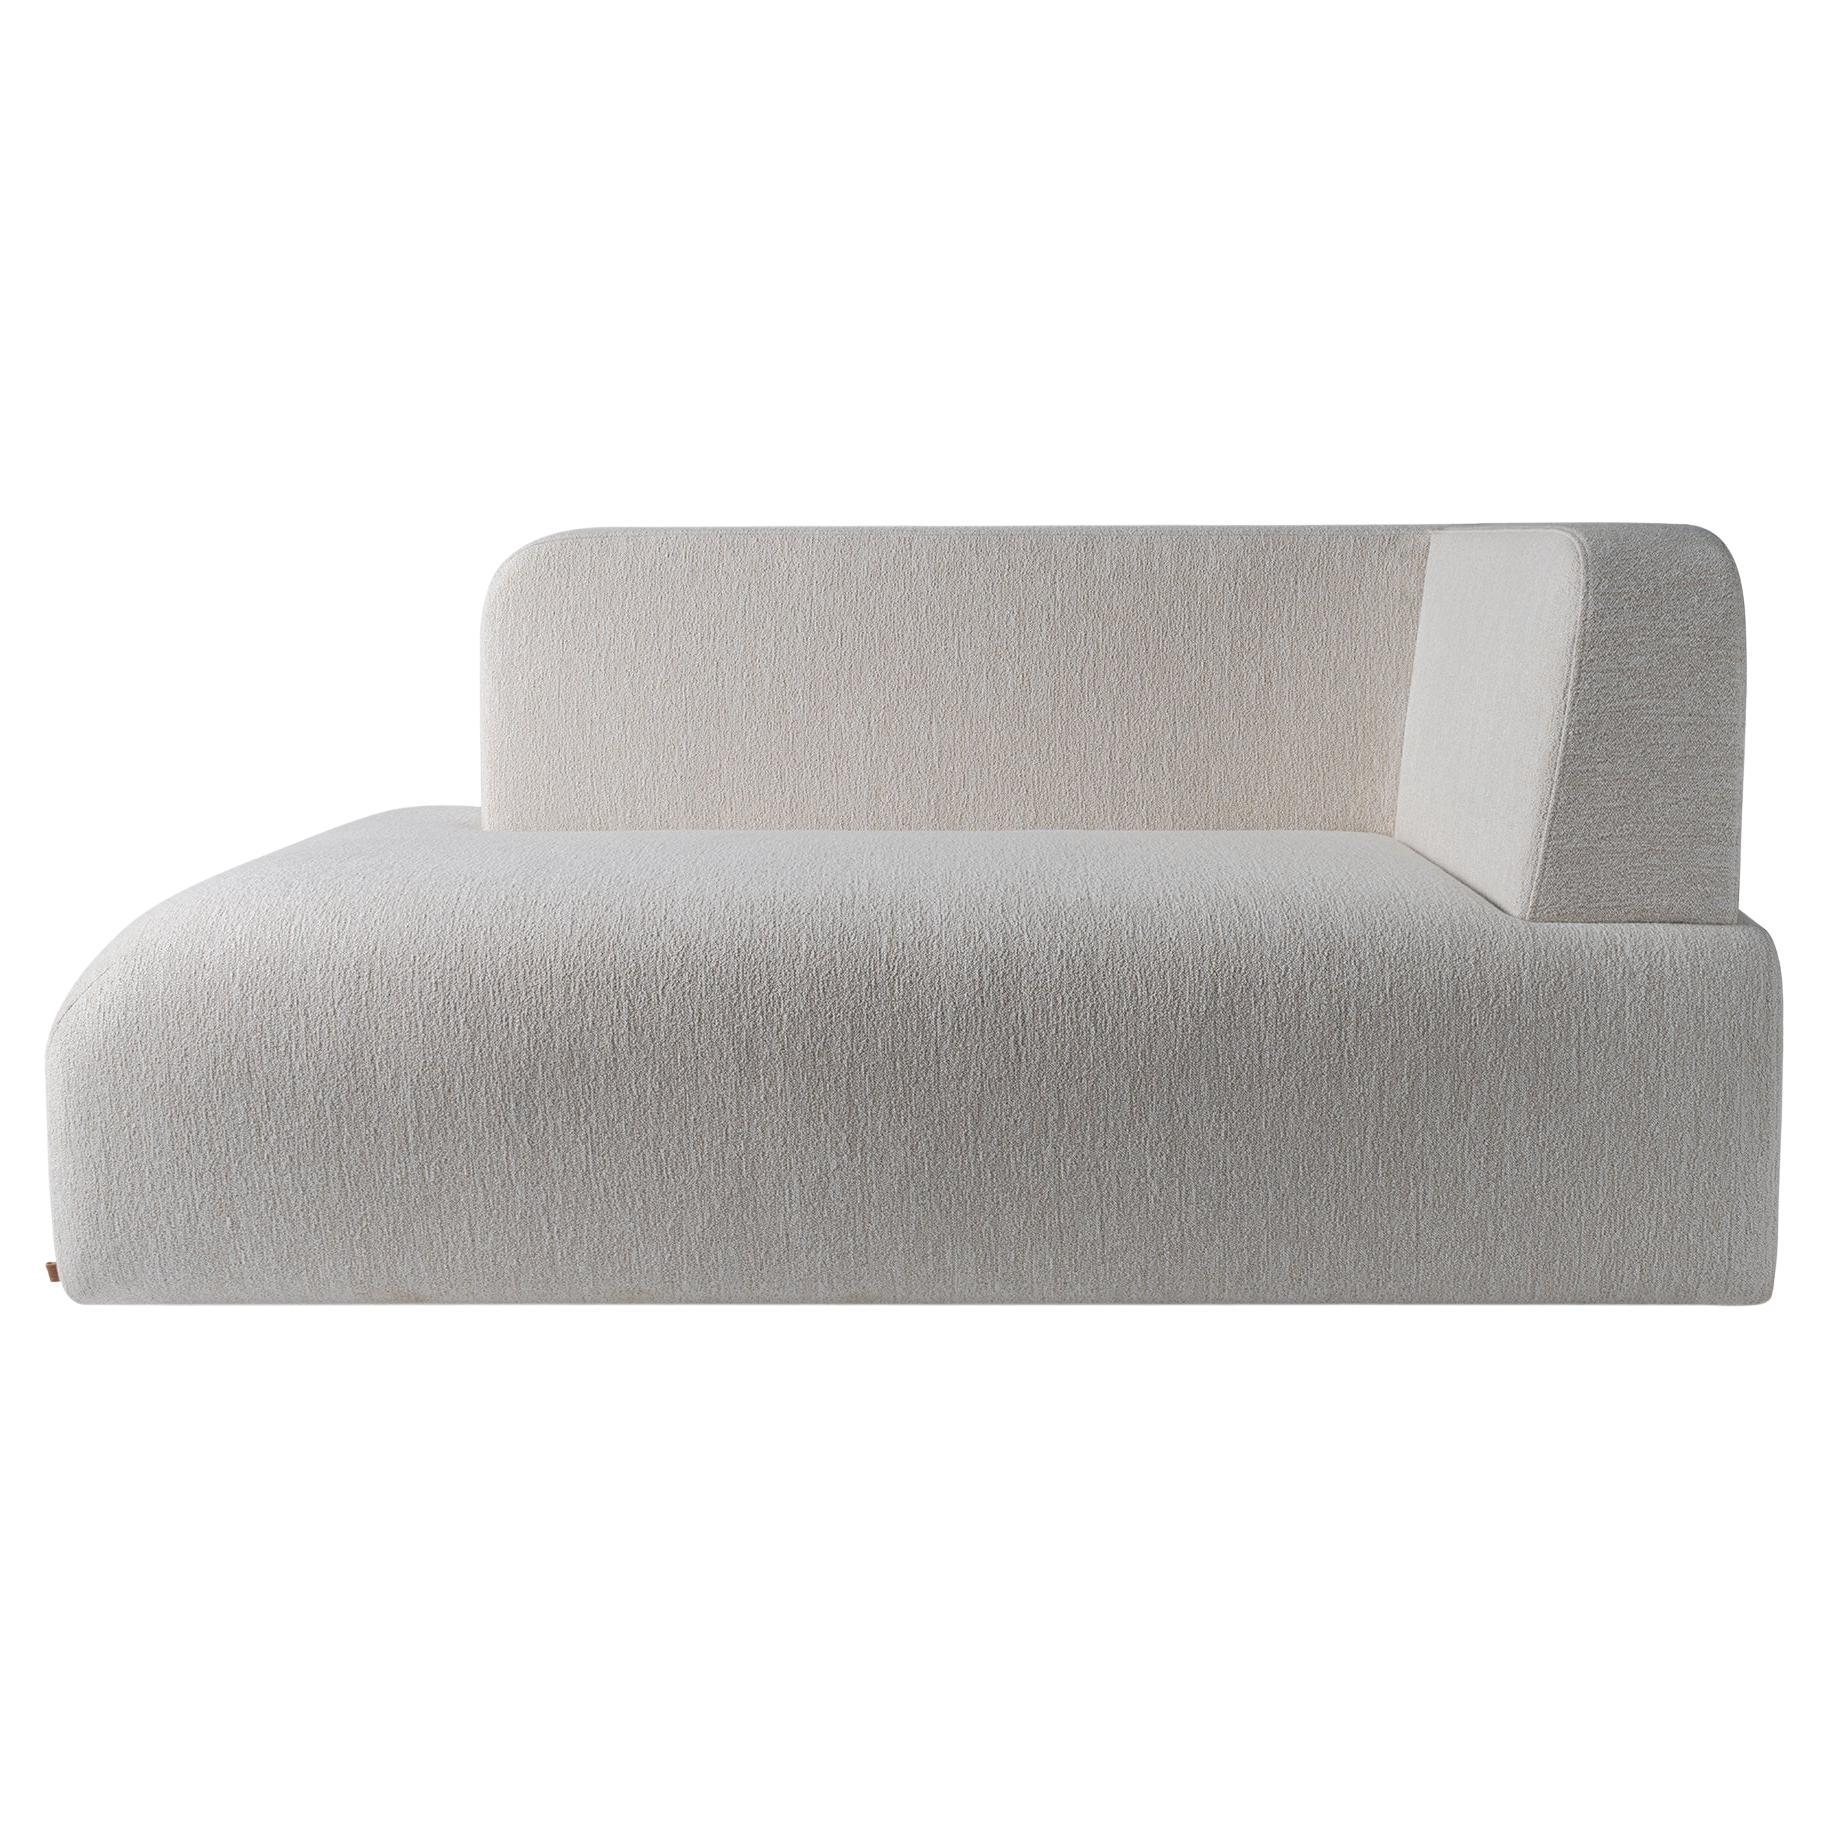 Dottie Lounge Module Seating Daybed For Sale